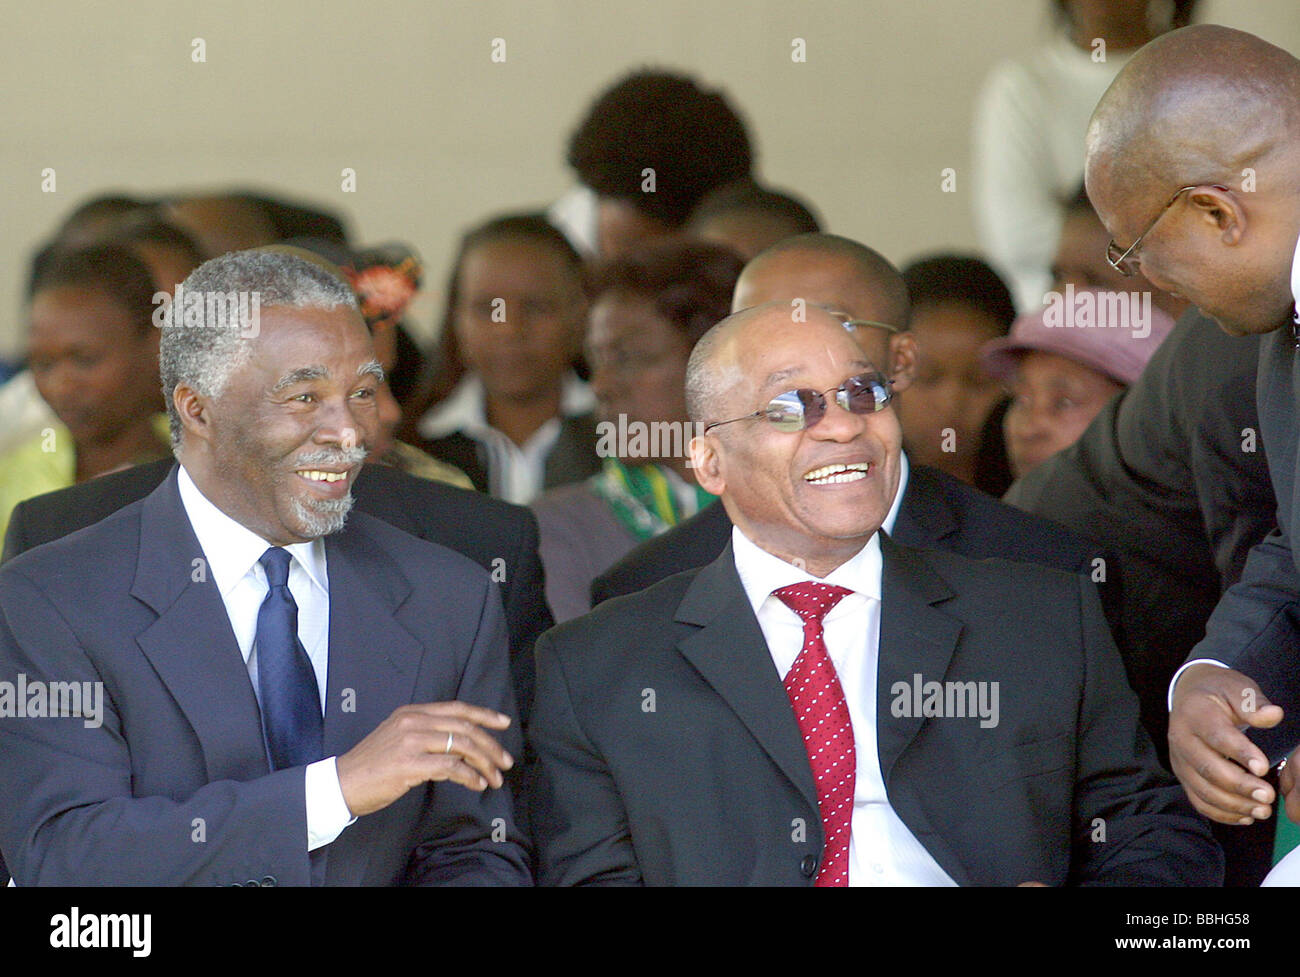 File picture nSouth African President Thabo Mbeki the then Deputy President Jacob Zuma and African National Congress ANC Stock Photo